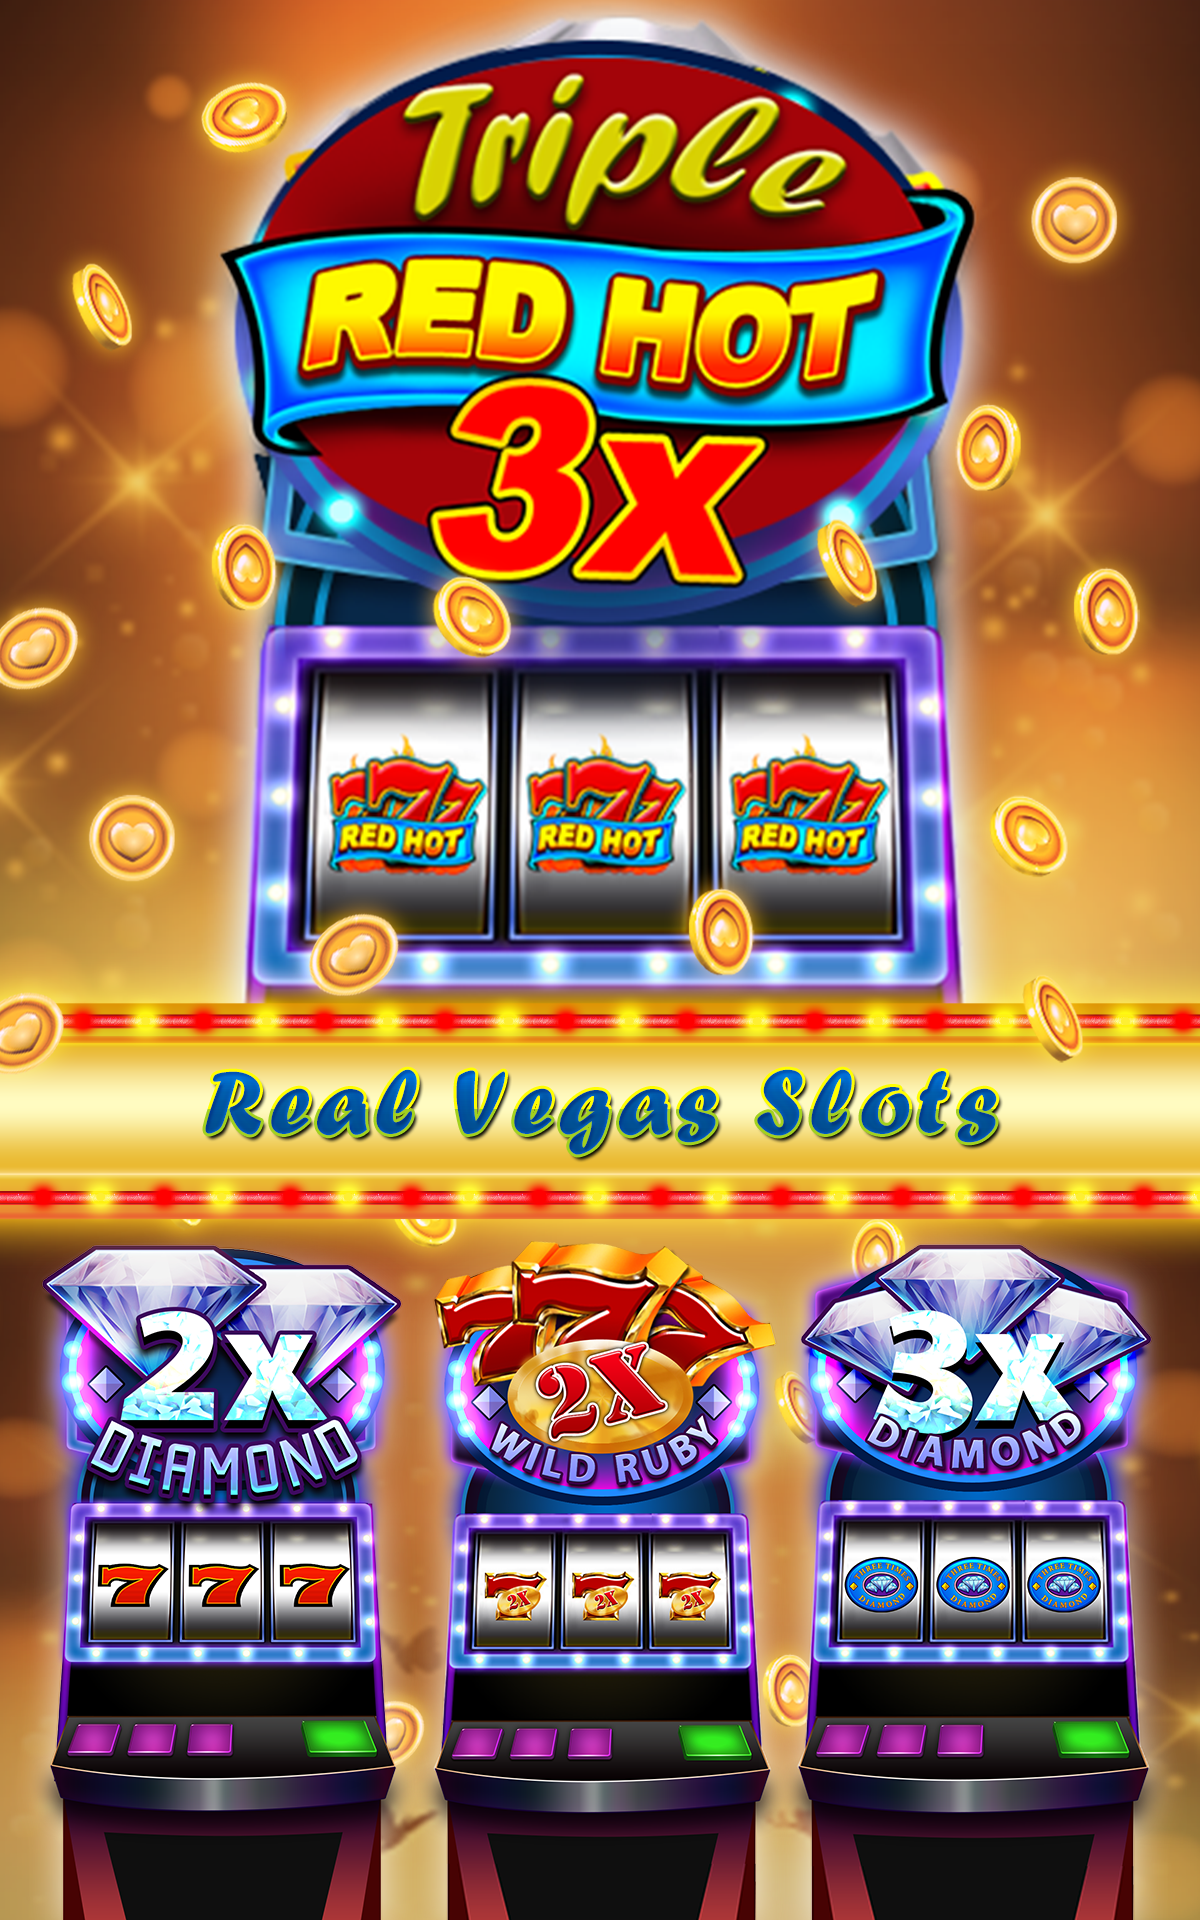 Red hot slots games